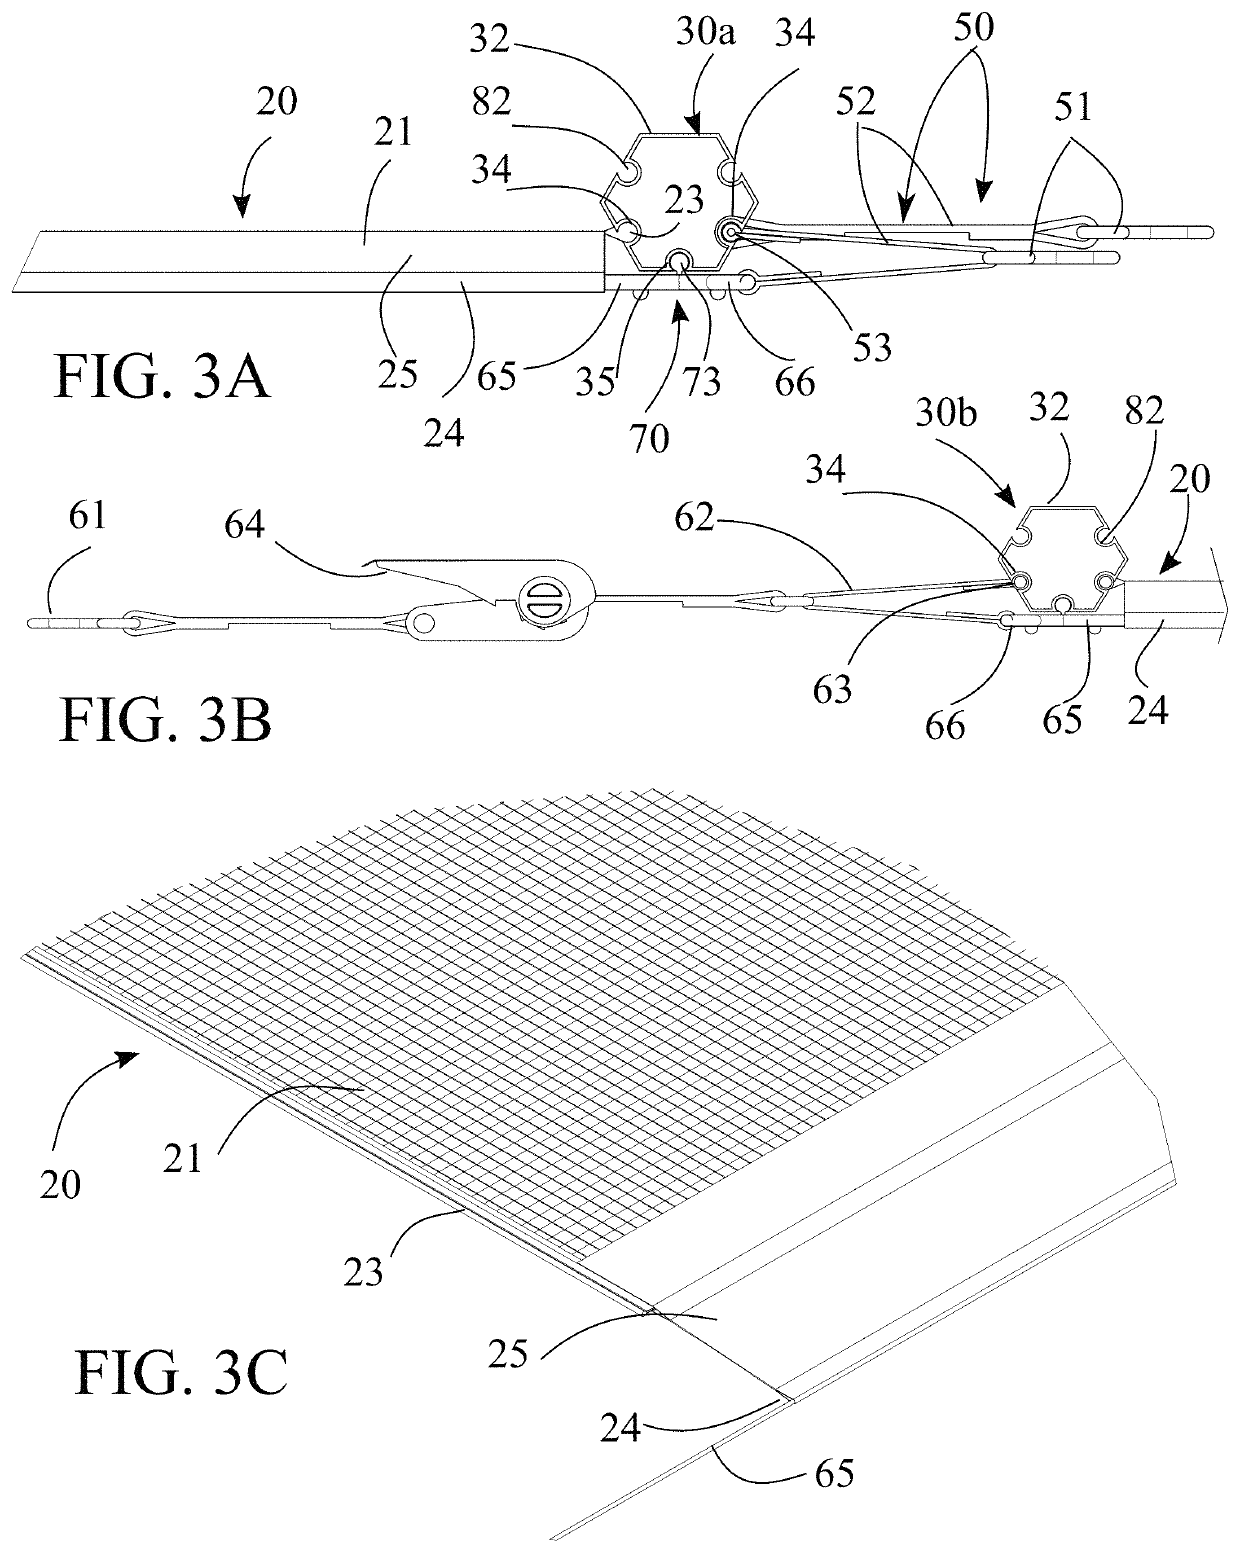 Modular and multipurpose covering device for a pool such as a swimming pool or the like